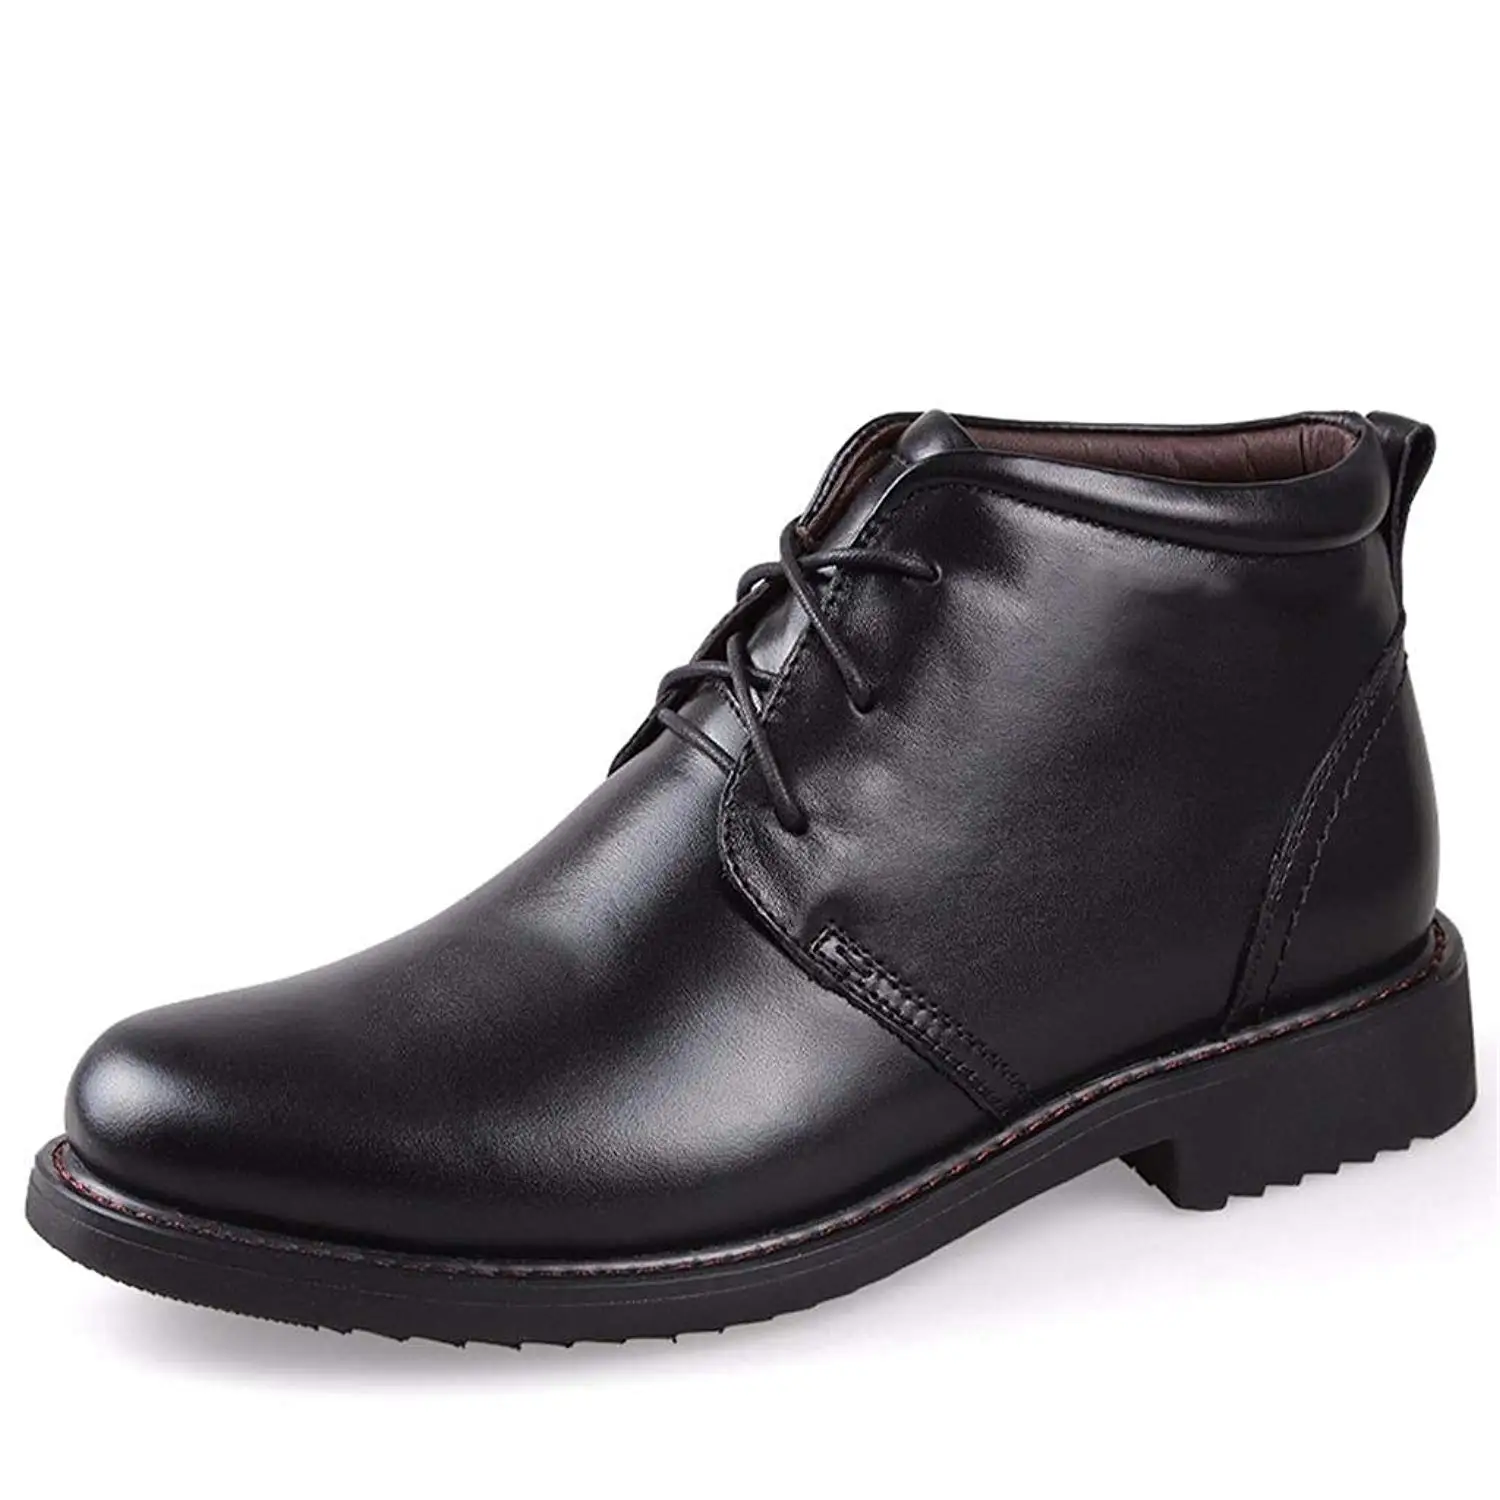 Cheap Chukka Style Boots, find Chukka Style Boots deals on line at ...